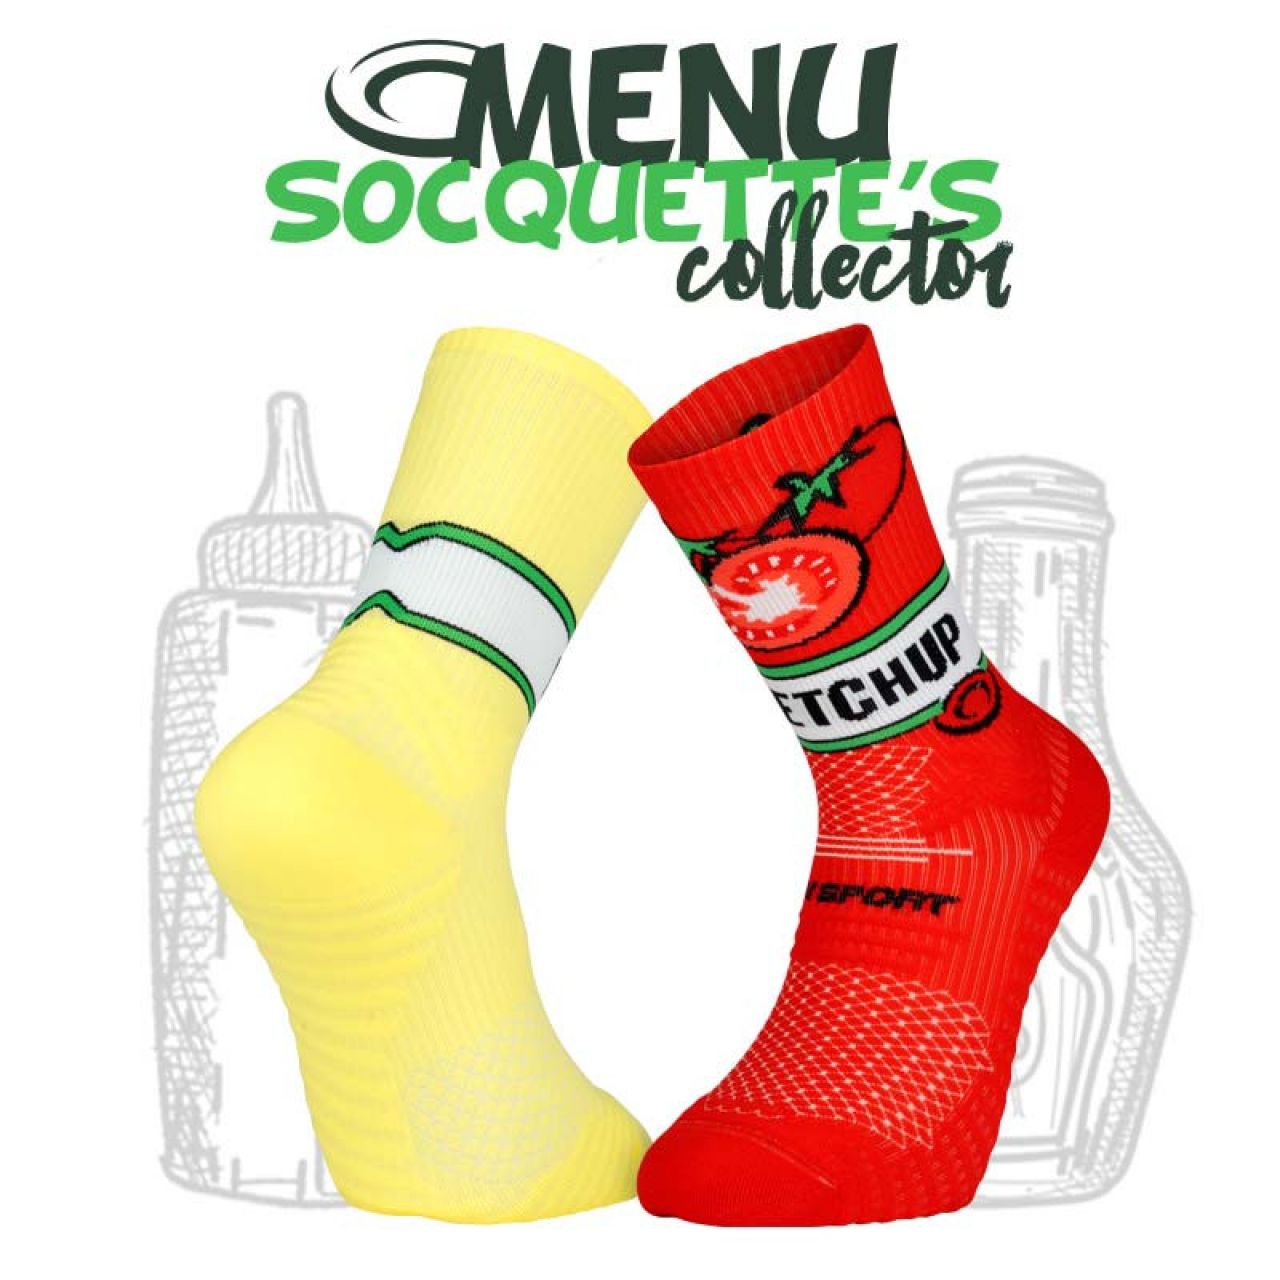 BV SPORT CHAUSSETTES TRAIL ULTRA NUTRISOCKS KETCHUP MAYO Chaussettes de trail